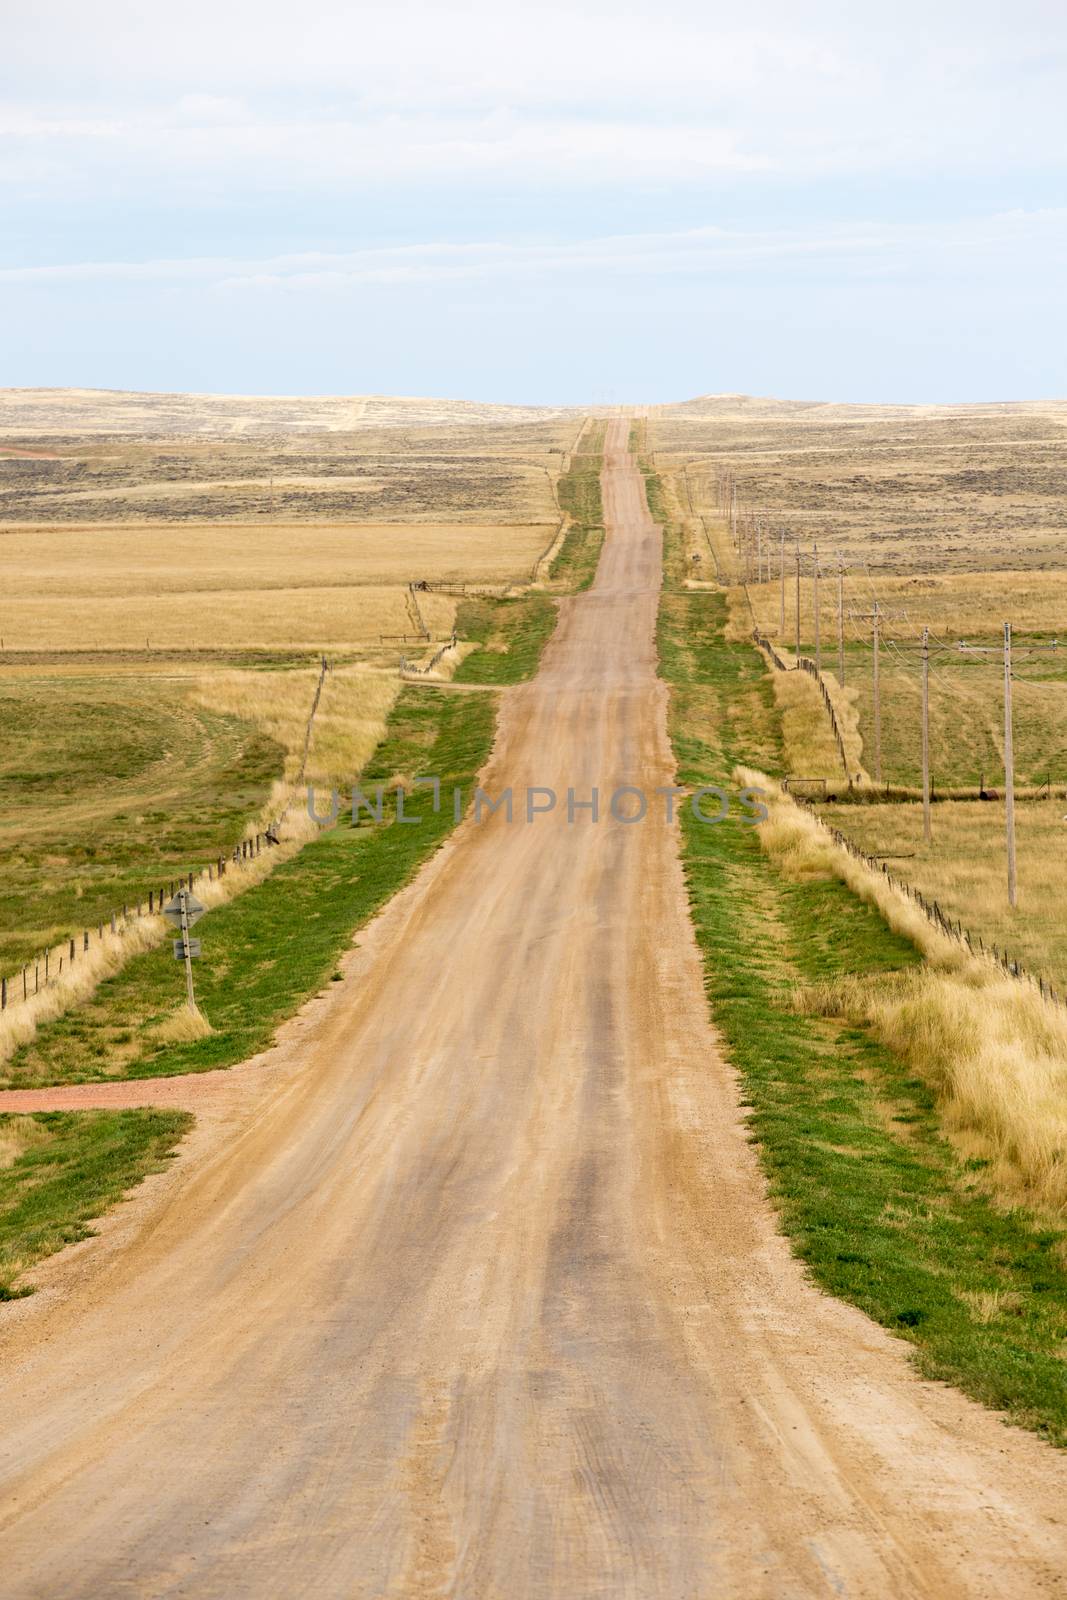 Long straight deserted dirt road in North Carolina, America disappearing into the distance of gently rolling undulating hilly terrain of the flat open plains